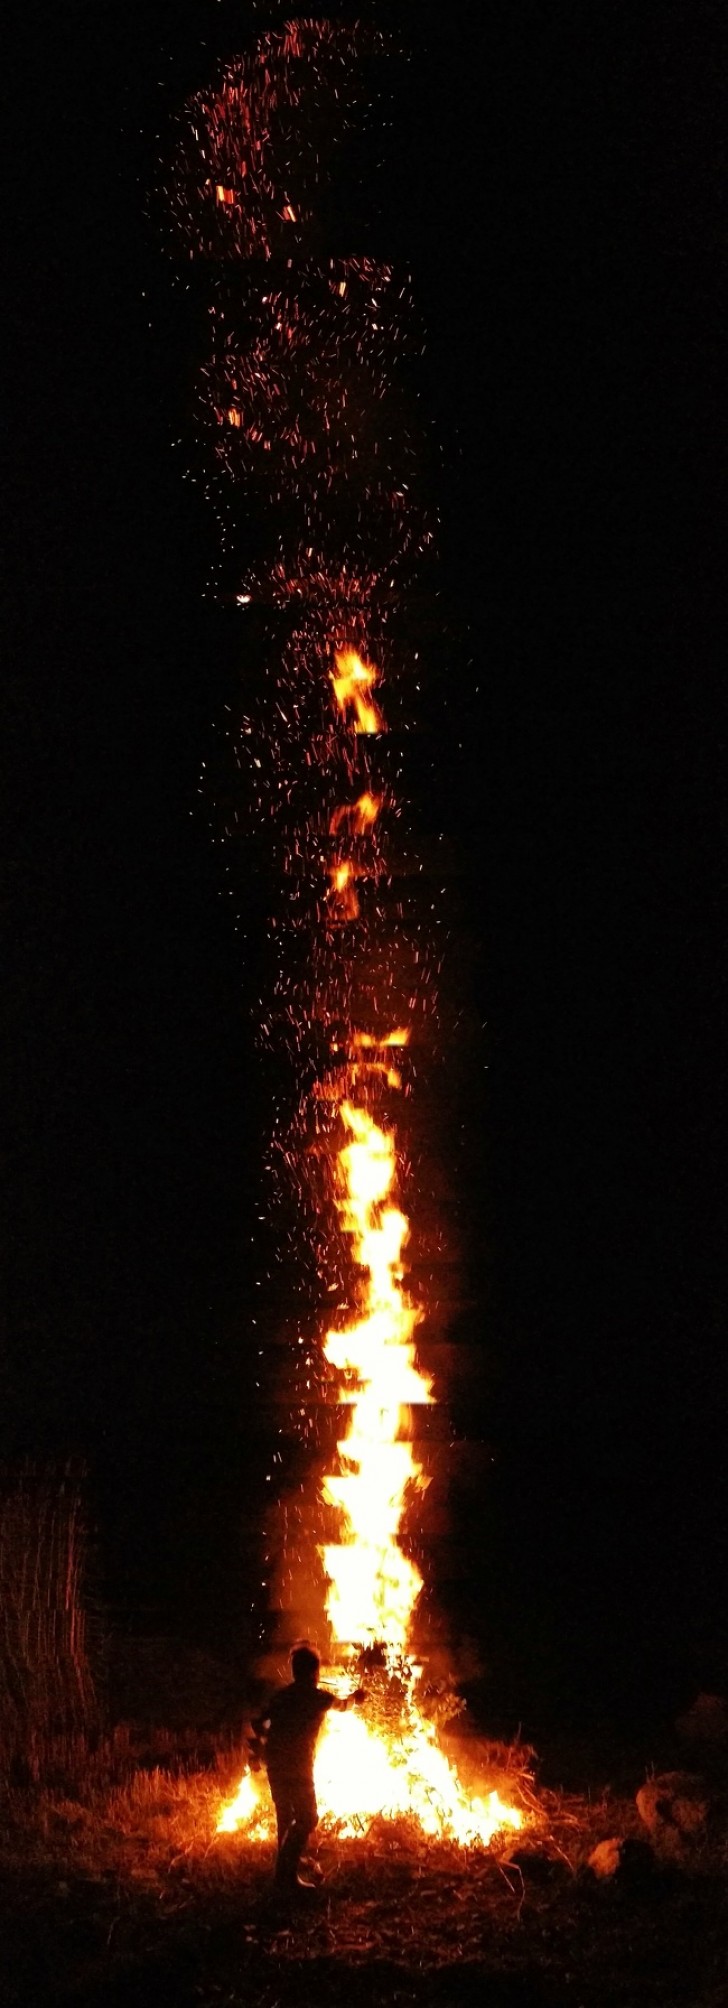 4. Vertical panorama --- here is the result, when the subject is a bonfire!